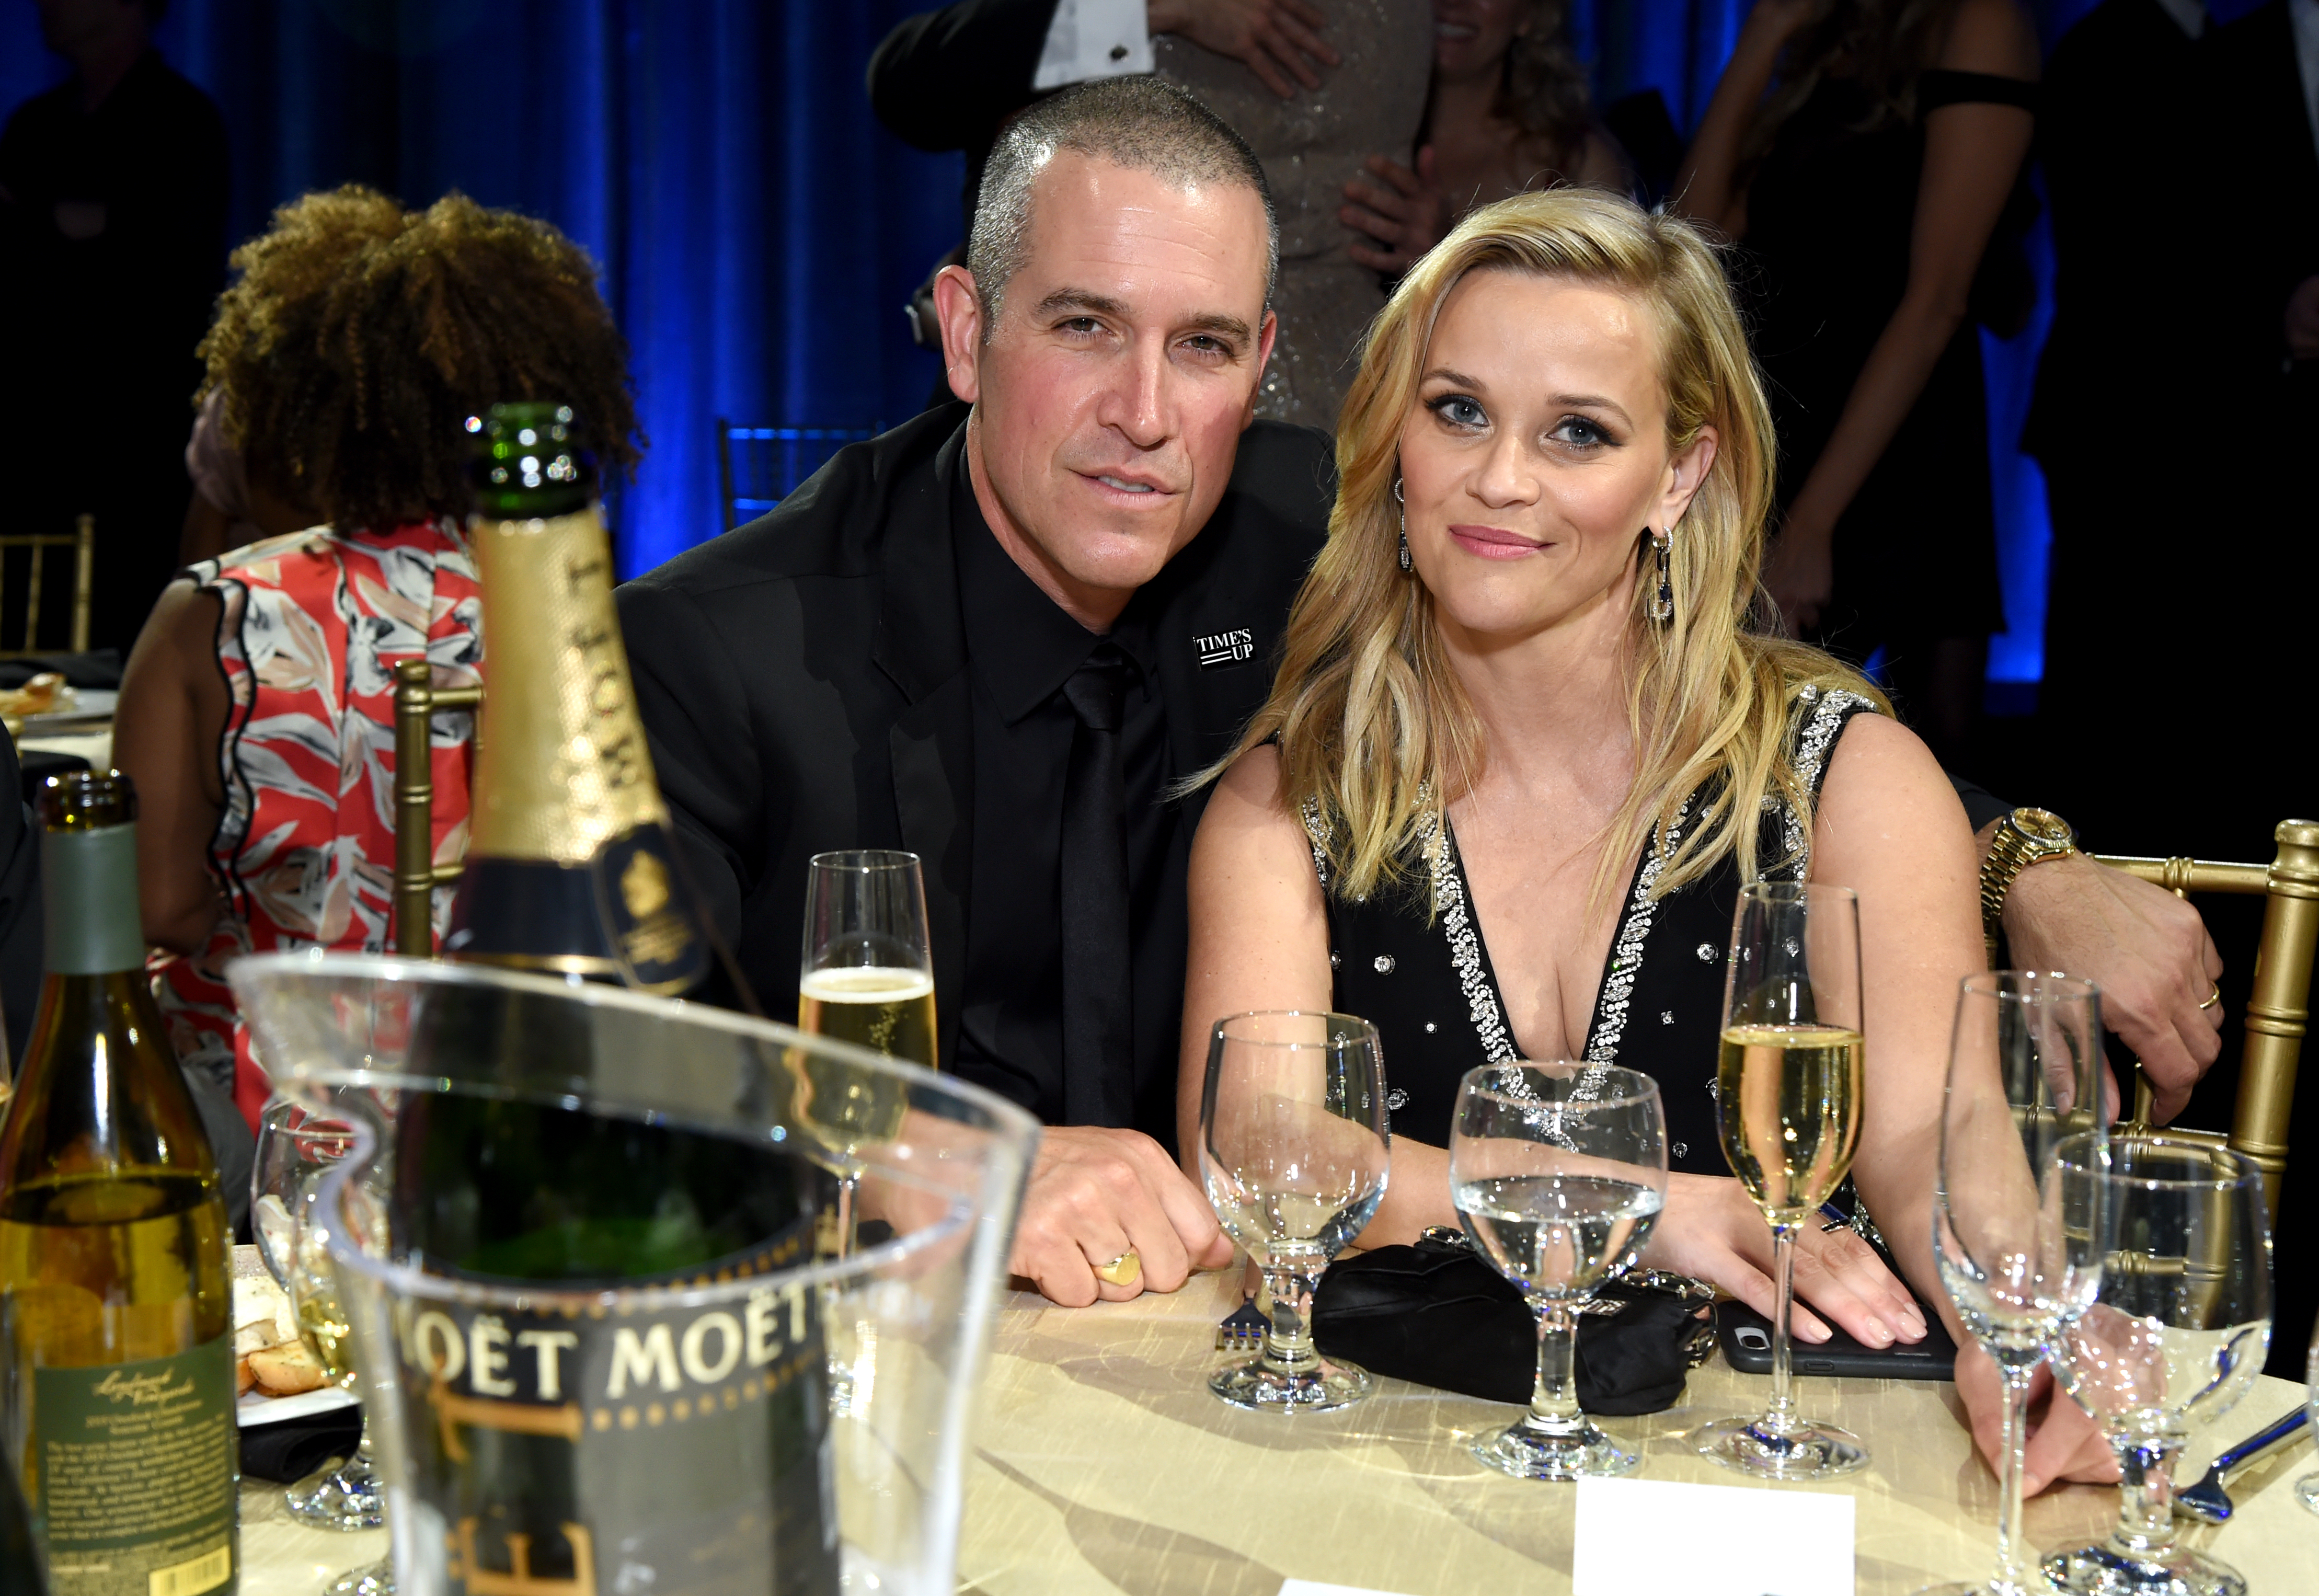 Jim Toth and Reese Witherspoon celebrate The 23rd Annual Critics' Choice Awards at Barker Hangar on January 11, 2018, in Santa Monica, California. | Source: Getty Images